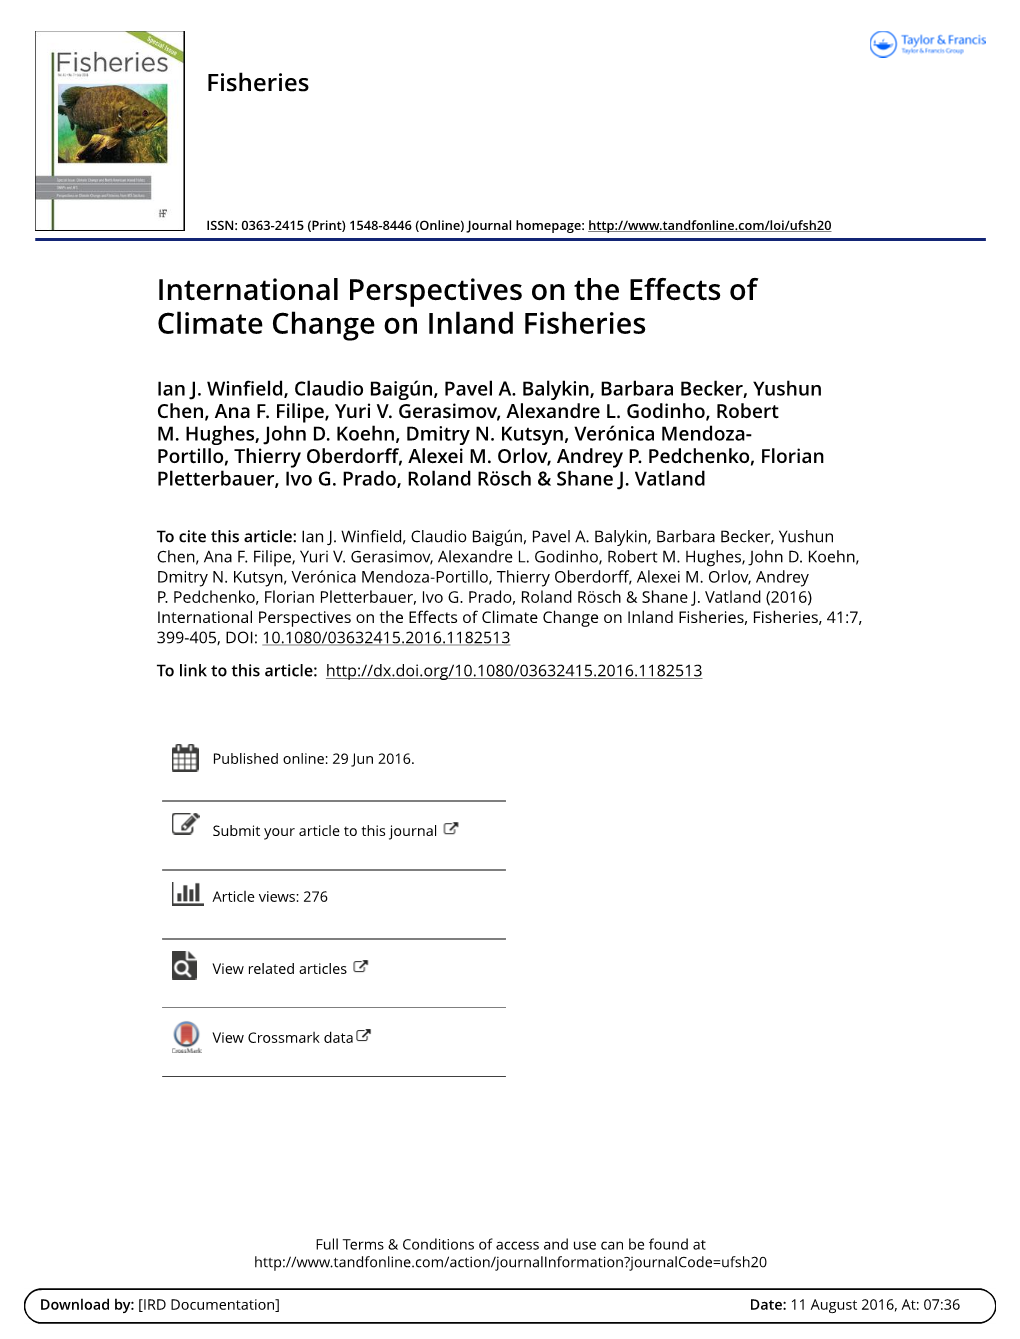 International Perspectives on the Effects of Climate Change on Inland Fisheries